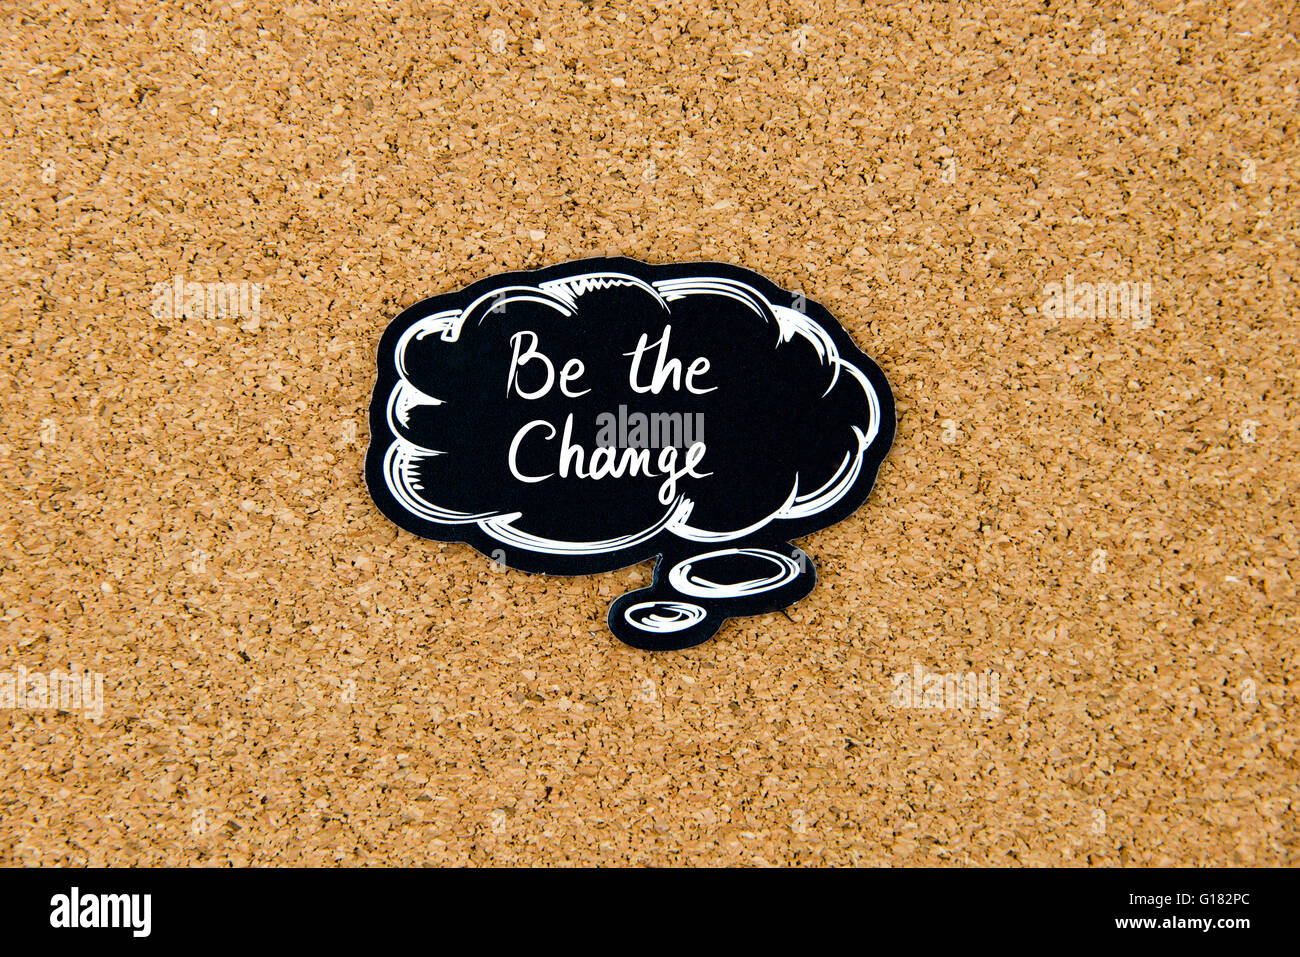 Be The Change written on black thinking bubble over cork board background, copy space available Stock Photo